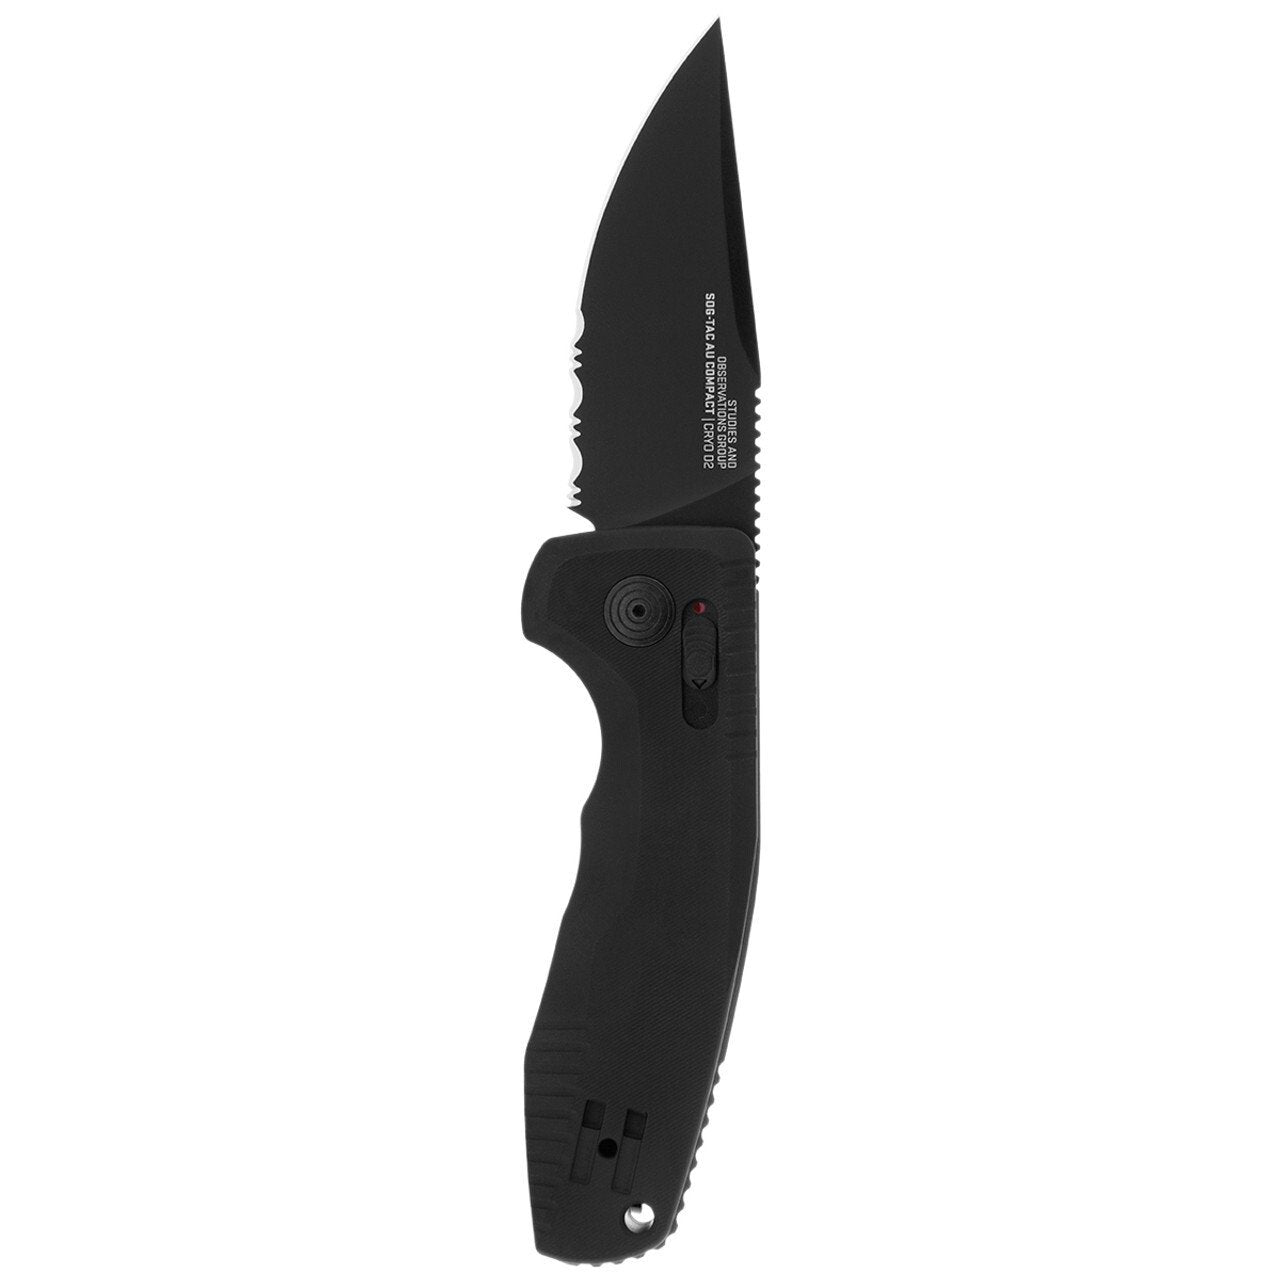 TAC AU Compact Tools SOG Specialty Knives & Tools Black Curved Partially Serrated